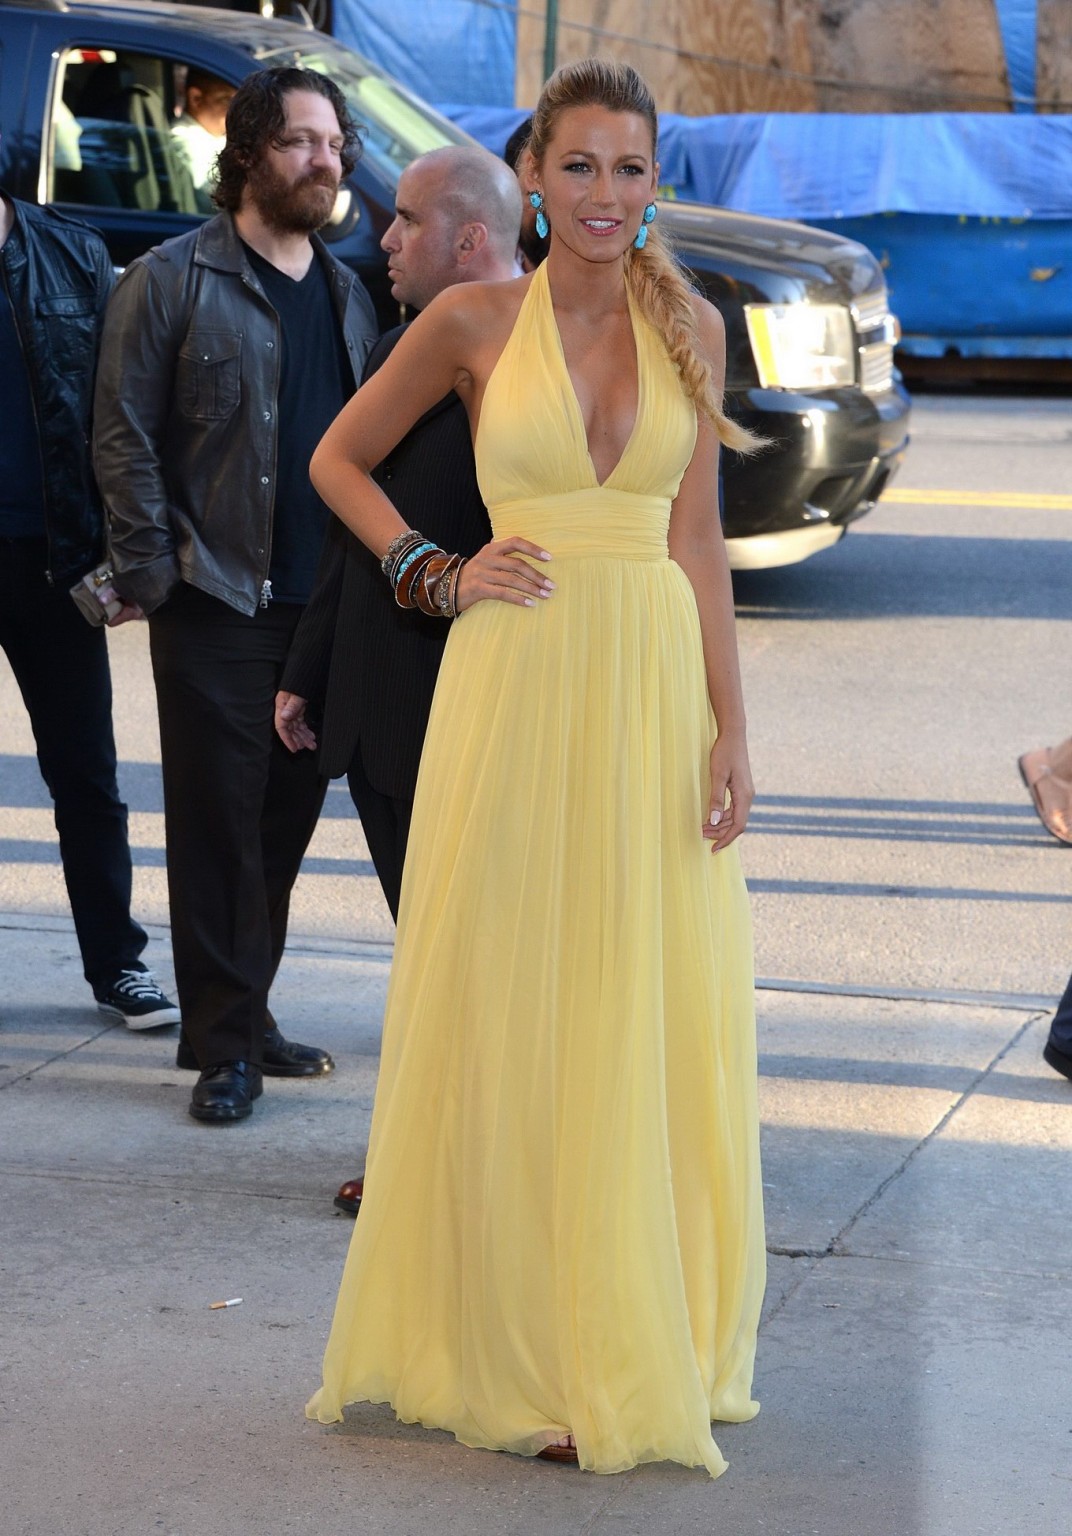 Blake Lively showing cleavage in yellow maxi dress at the 'Savages' premiere in  #75258870